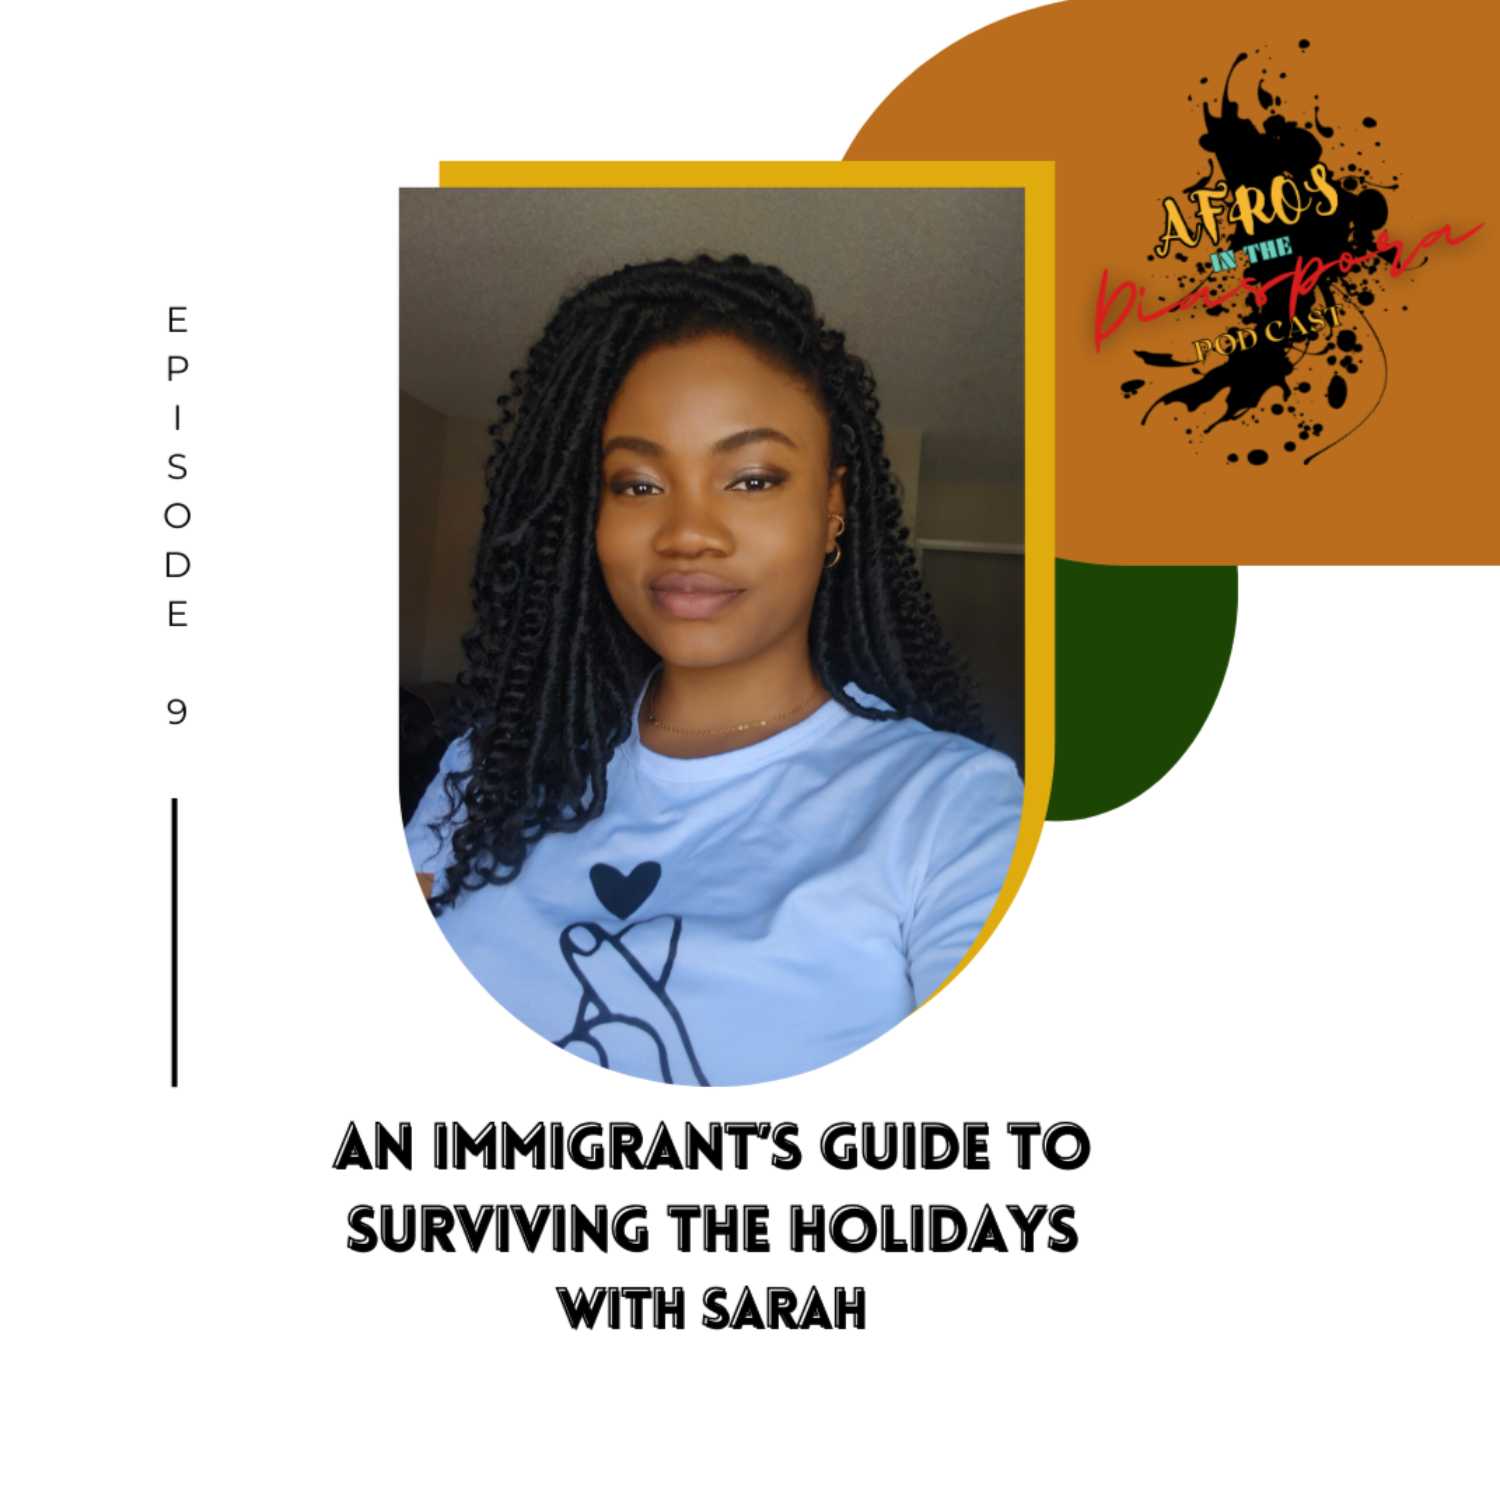 An Immigrant's Guide to Surviving the Holidays with Sarah